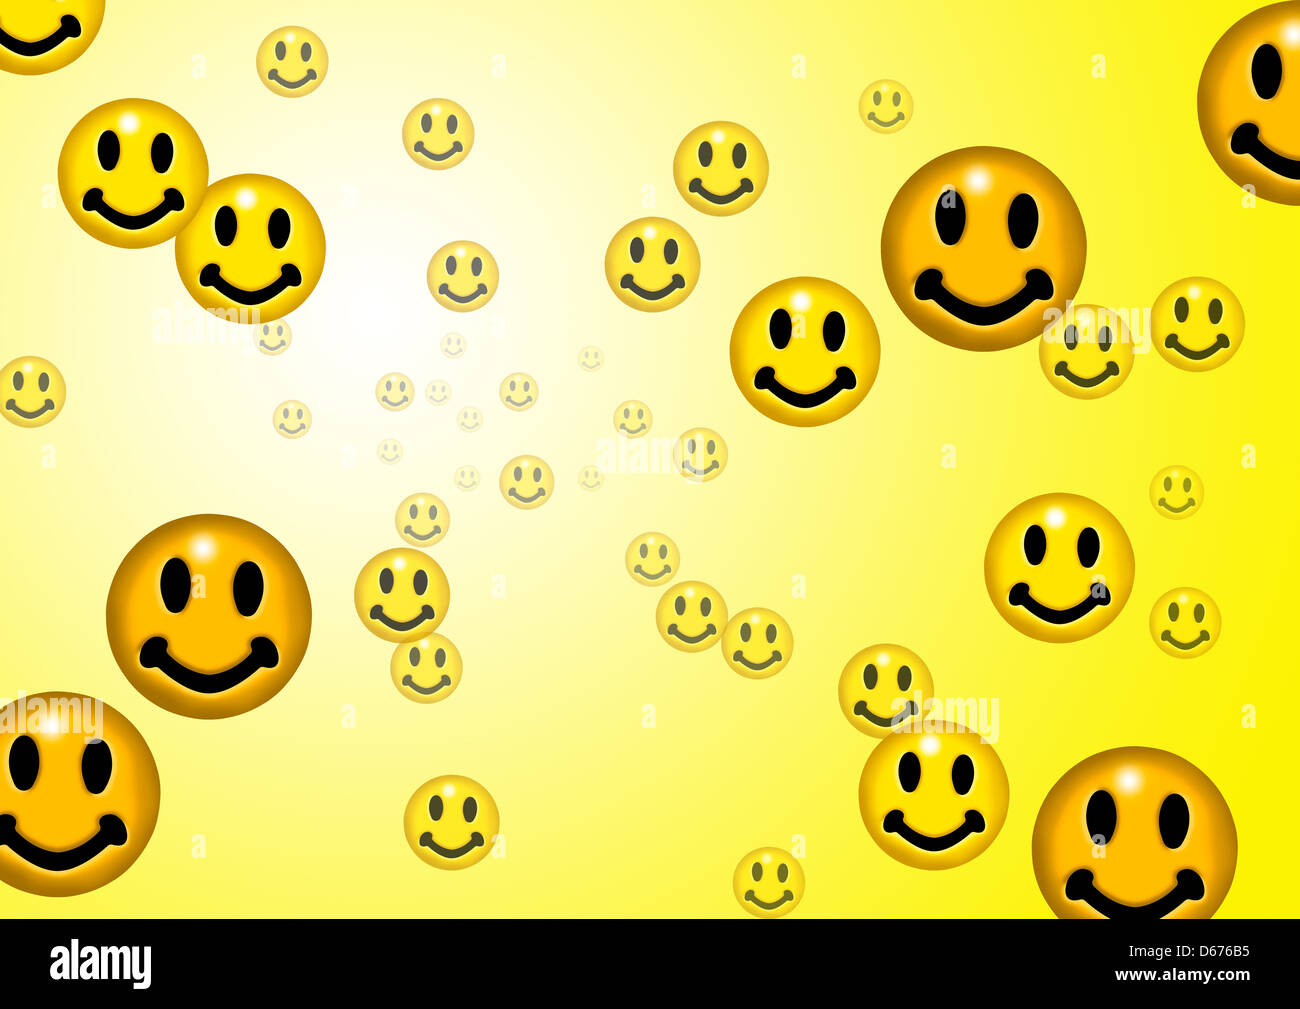 A number of yellow smiley face emoticons evolving from a distant and faded position Stock Photo